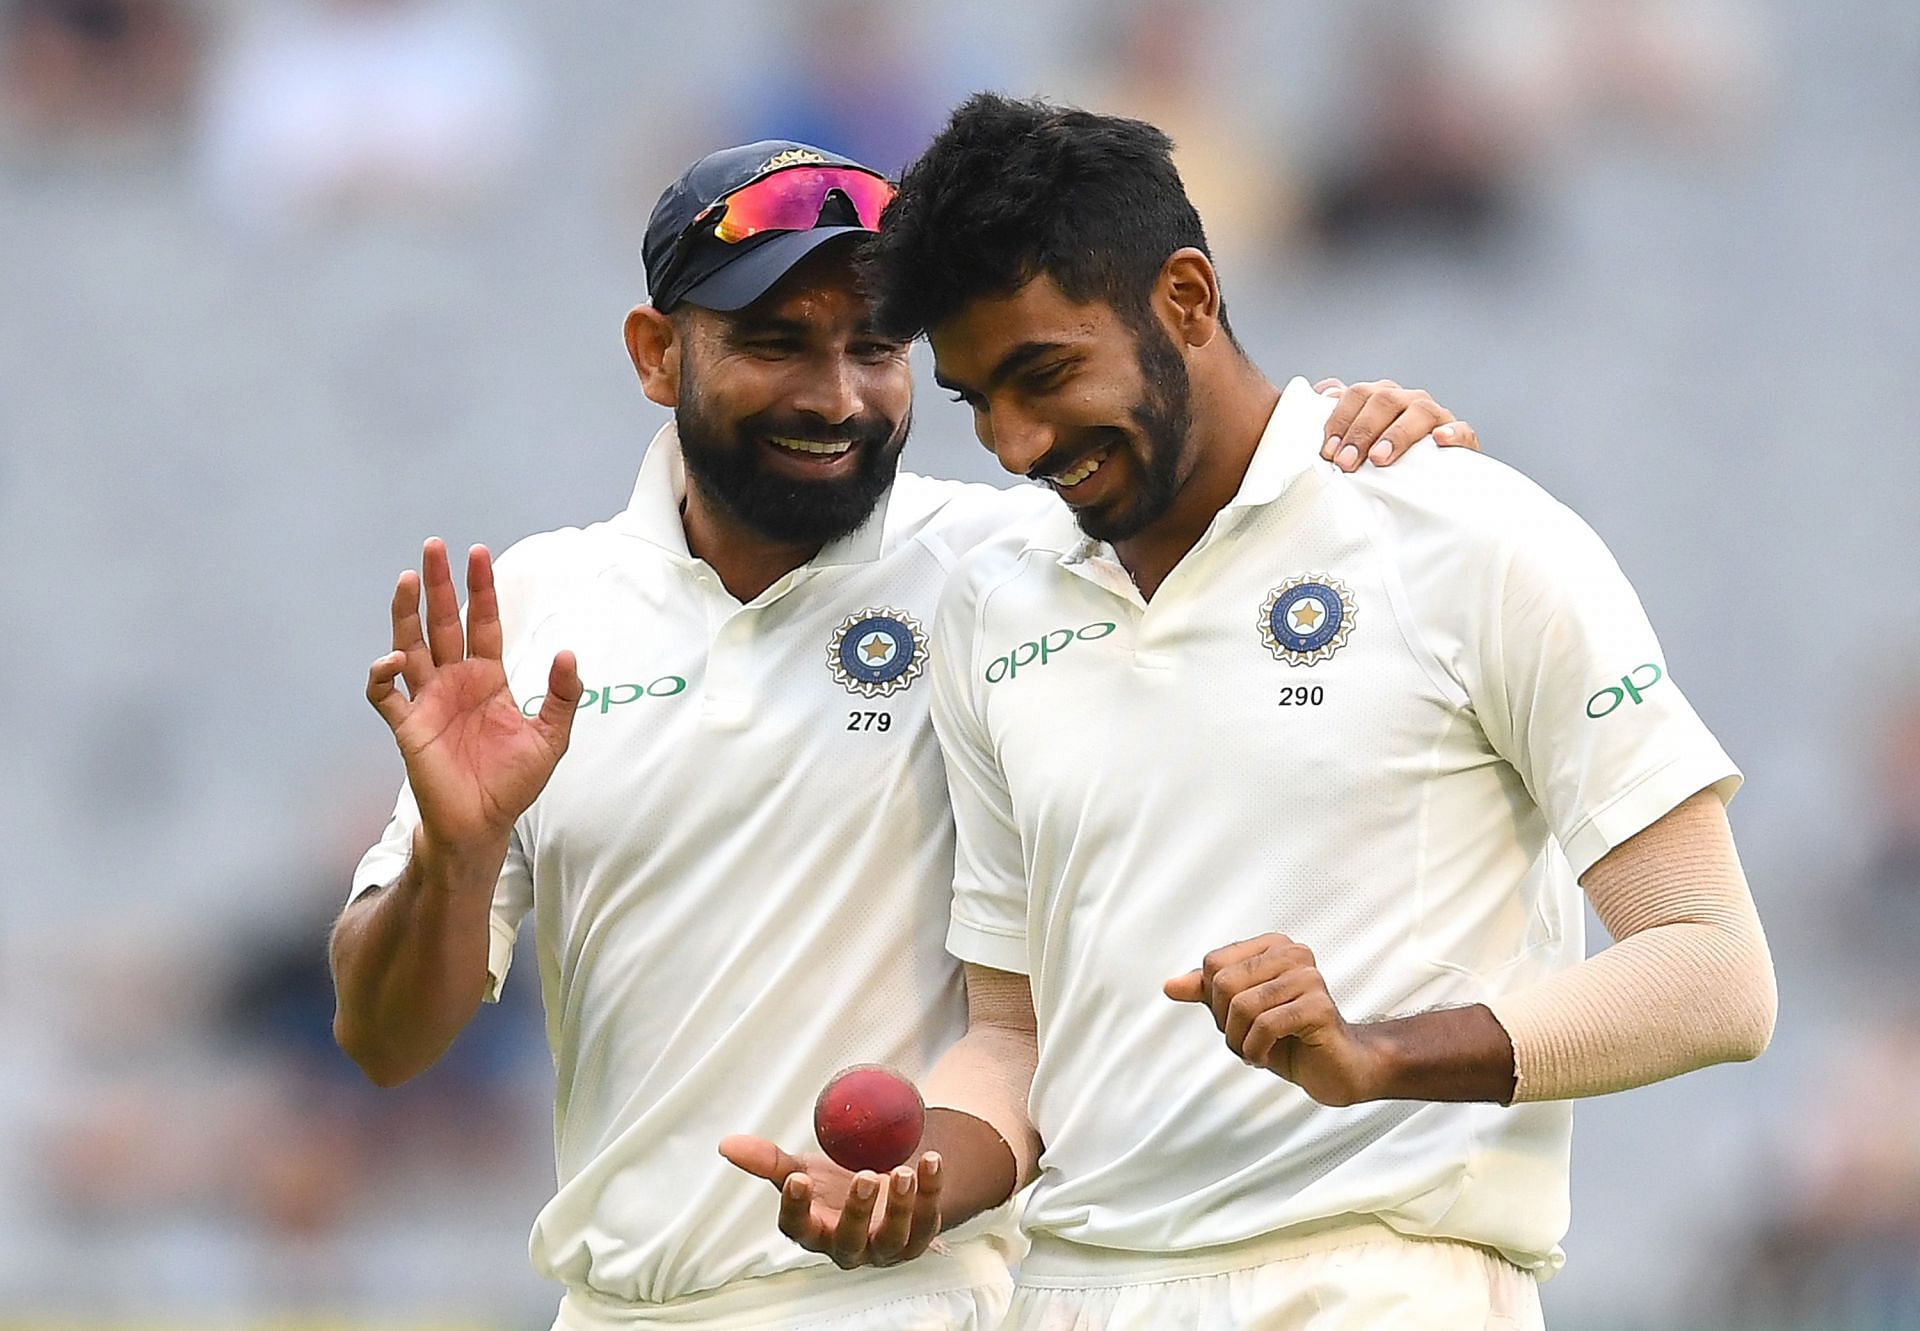 Reetinder Sodhi feels Mohammed Shami and Jasprit Bumrah could have a field day with the pink ball